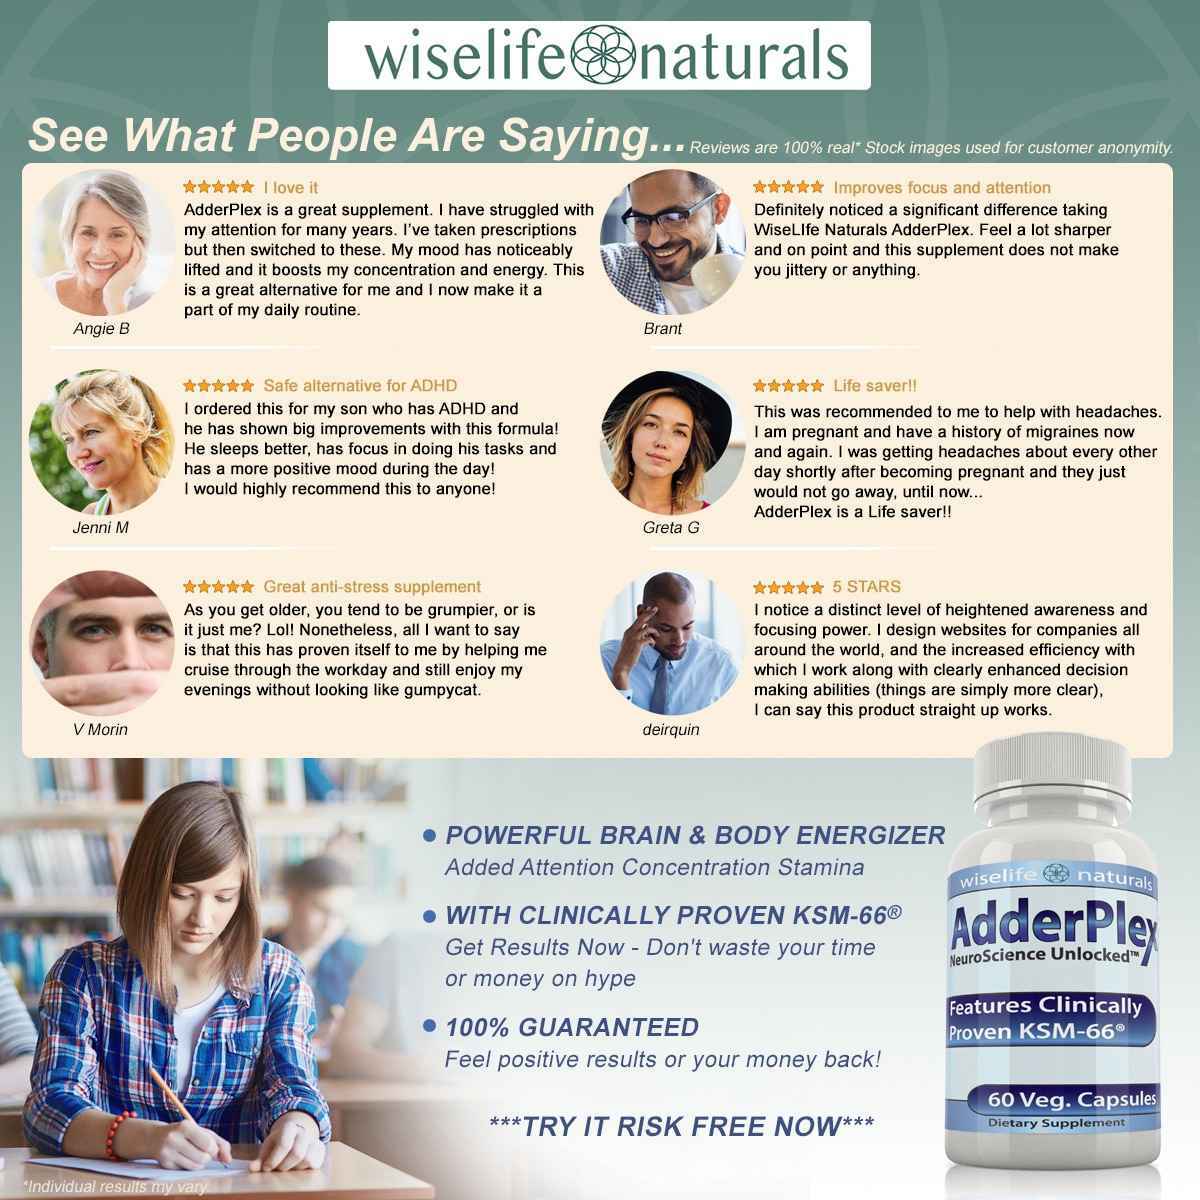 WiseLifeNaturals Energy Boost Nootropic Brain Foods - Focus Mood Memory Natural Nerve Tonic Anti Anxiety Stress Support Sport Enhancing Pill Stack Ashwagandha Bacopa Ginkgo Ginseng Phosphatidylserine DMAE